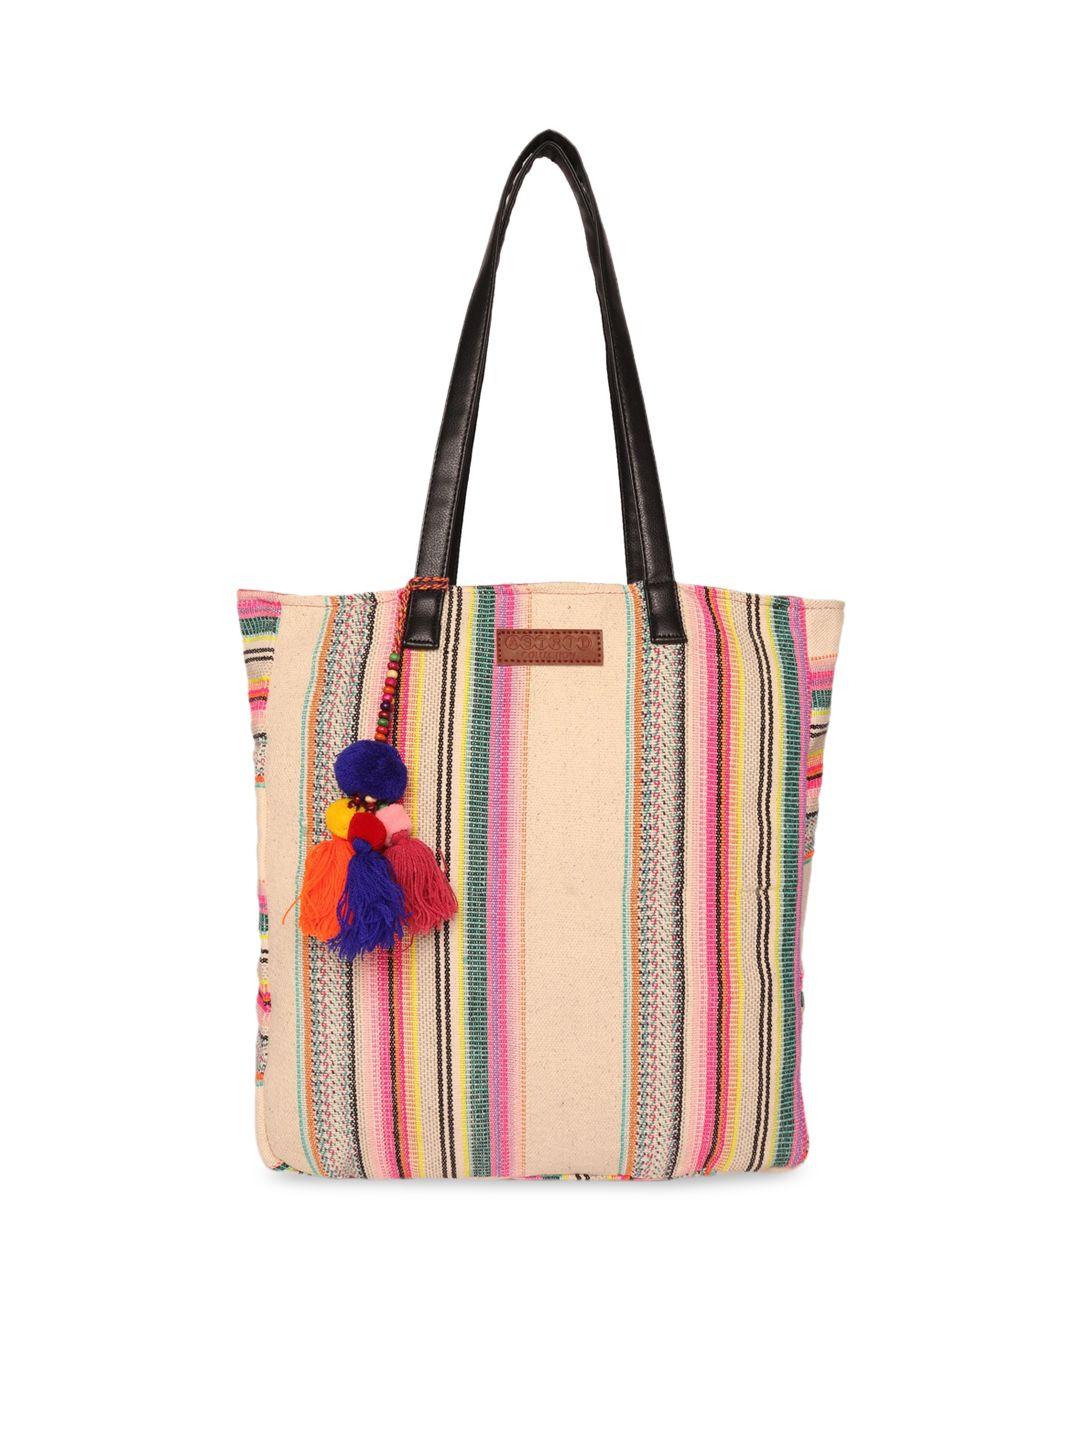 astrid striped shopper tote bag with tasselled